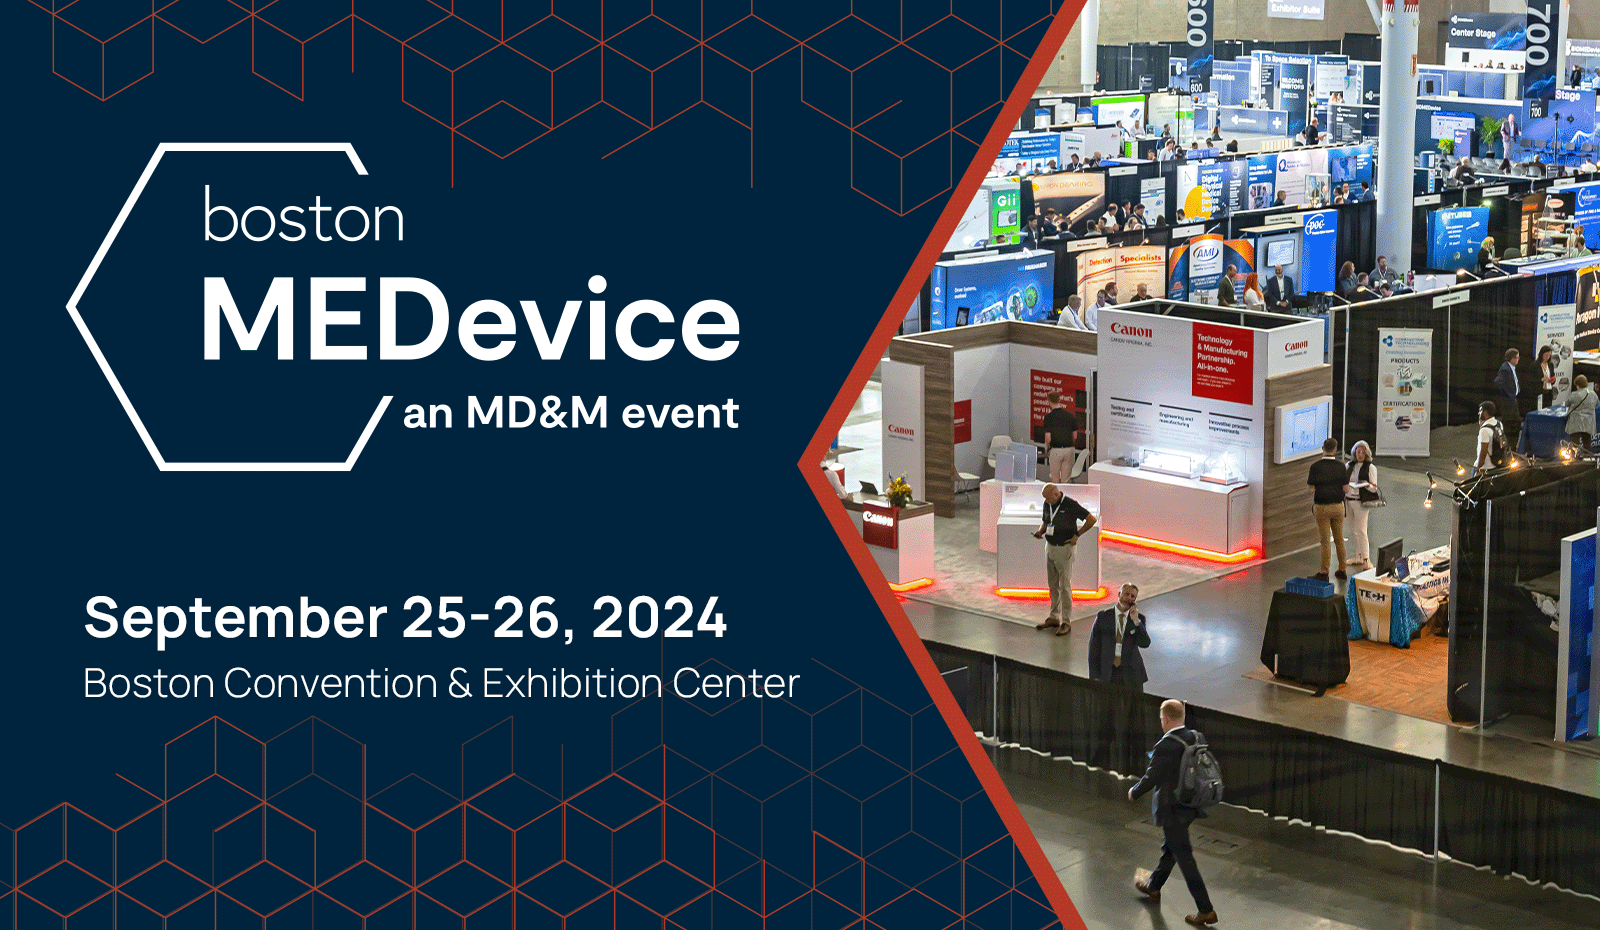 MEDevice Boston an MD&M event | September 25-26, 2024 | Boston Convention & Exhibition Center